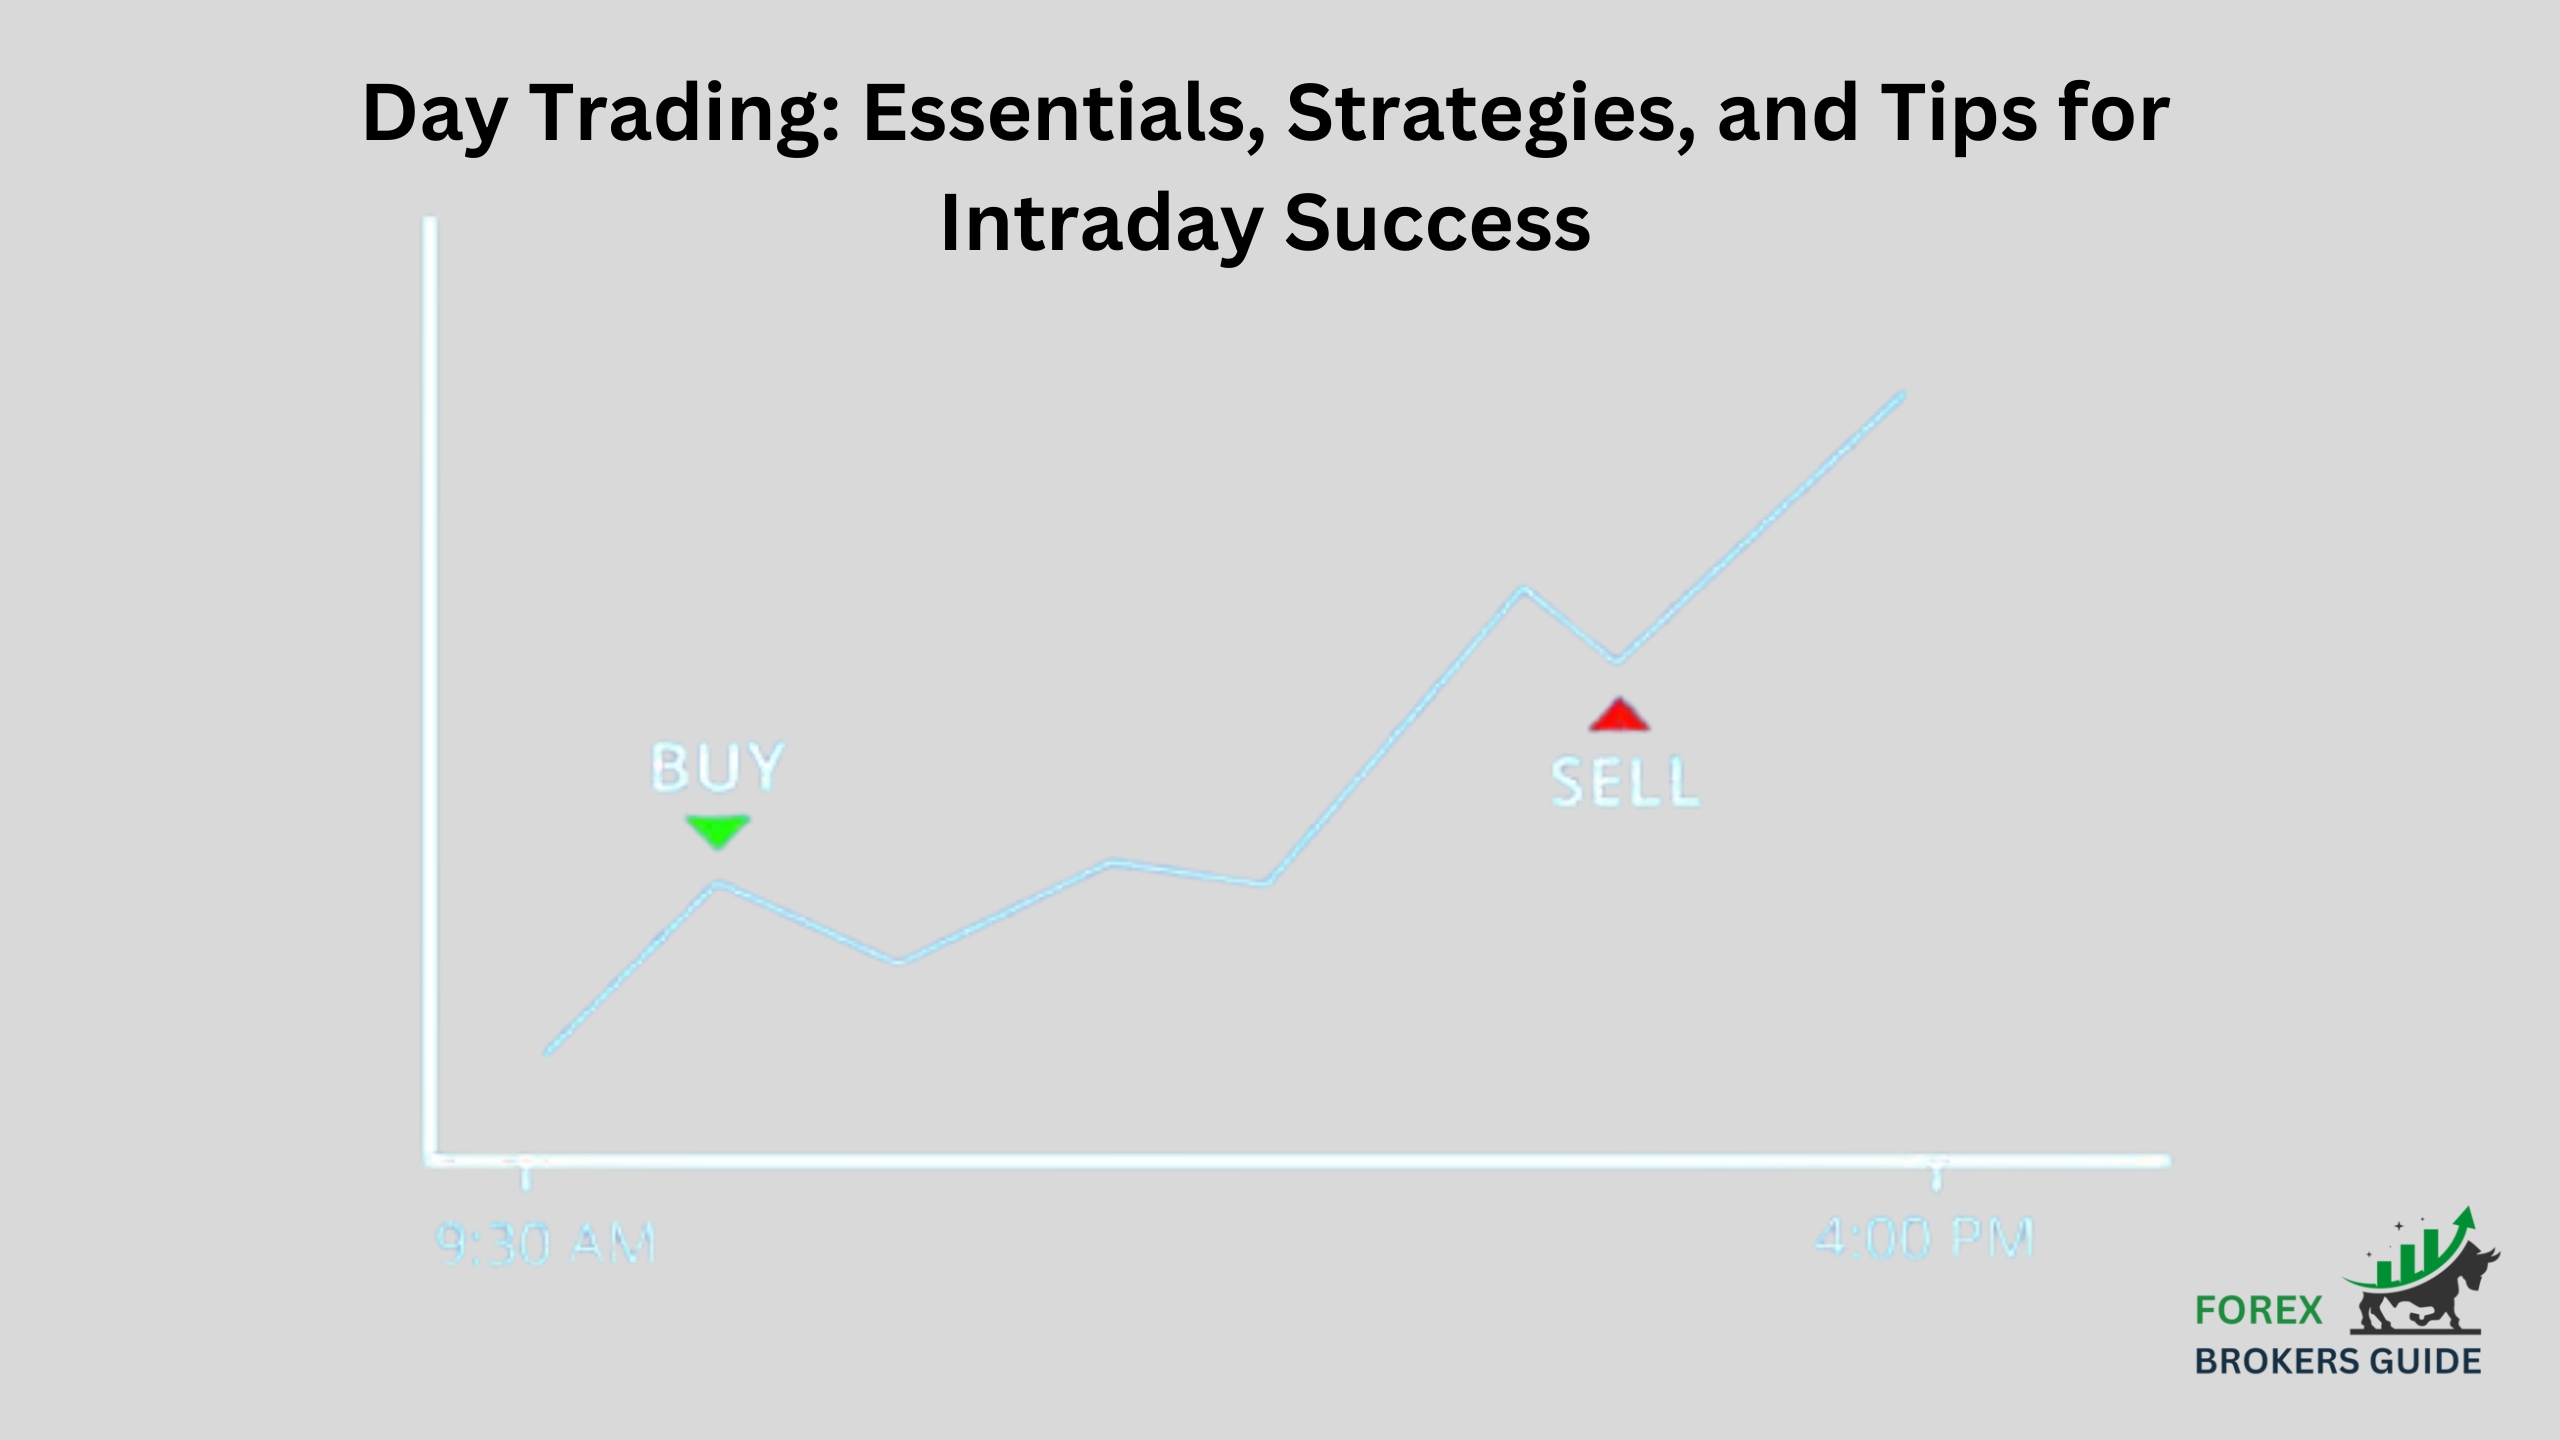 Day Trading Essentials, Strategies, and Tips for Intraday Success